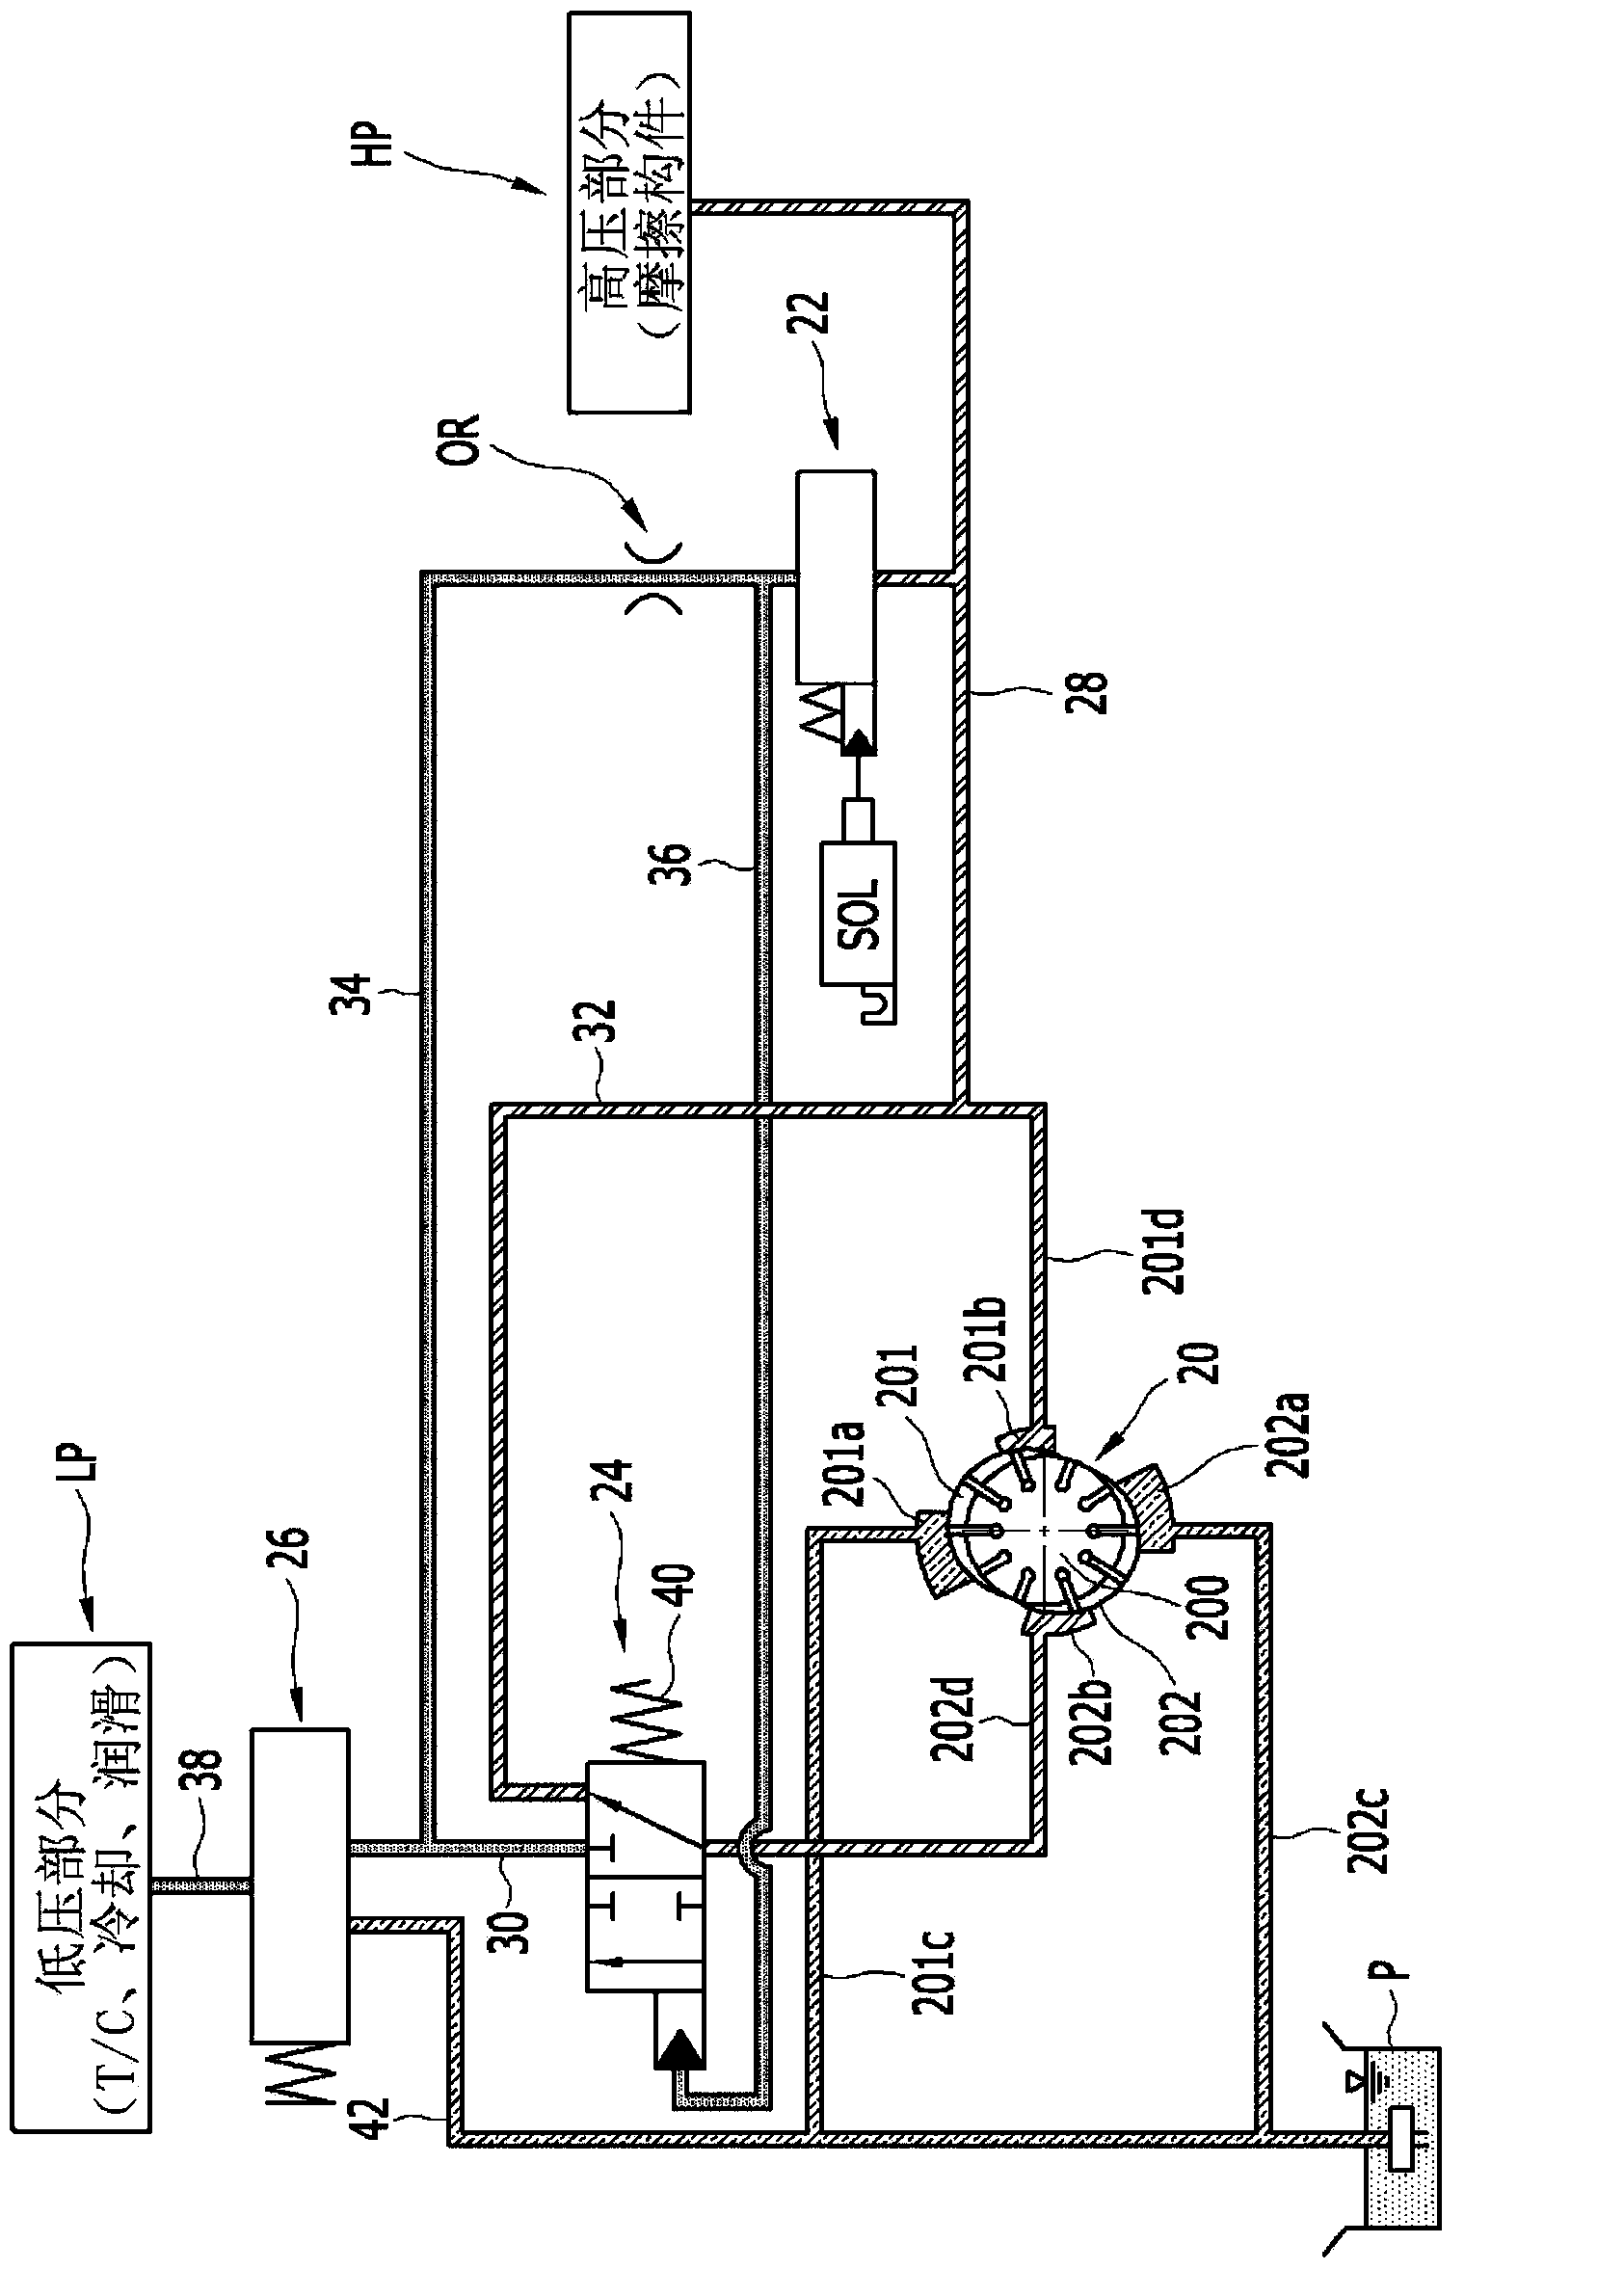 Hydraulic pressure supply system of automatic transmission for vehicle